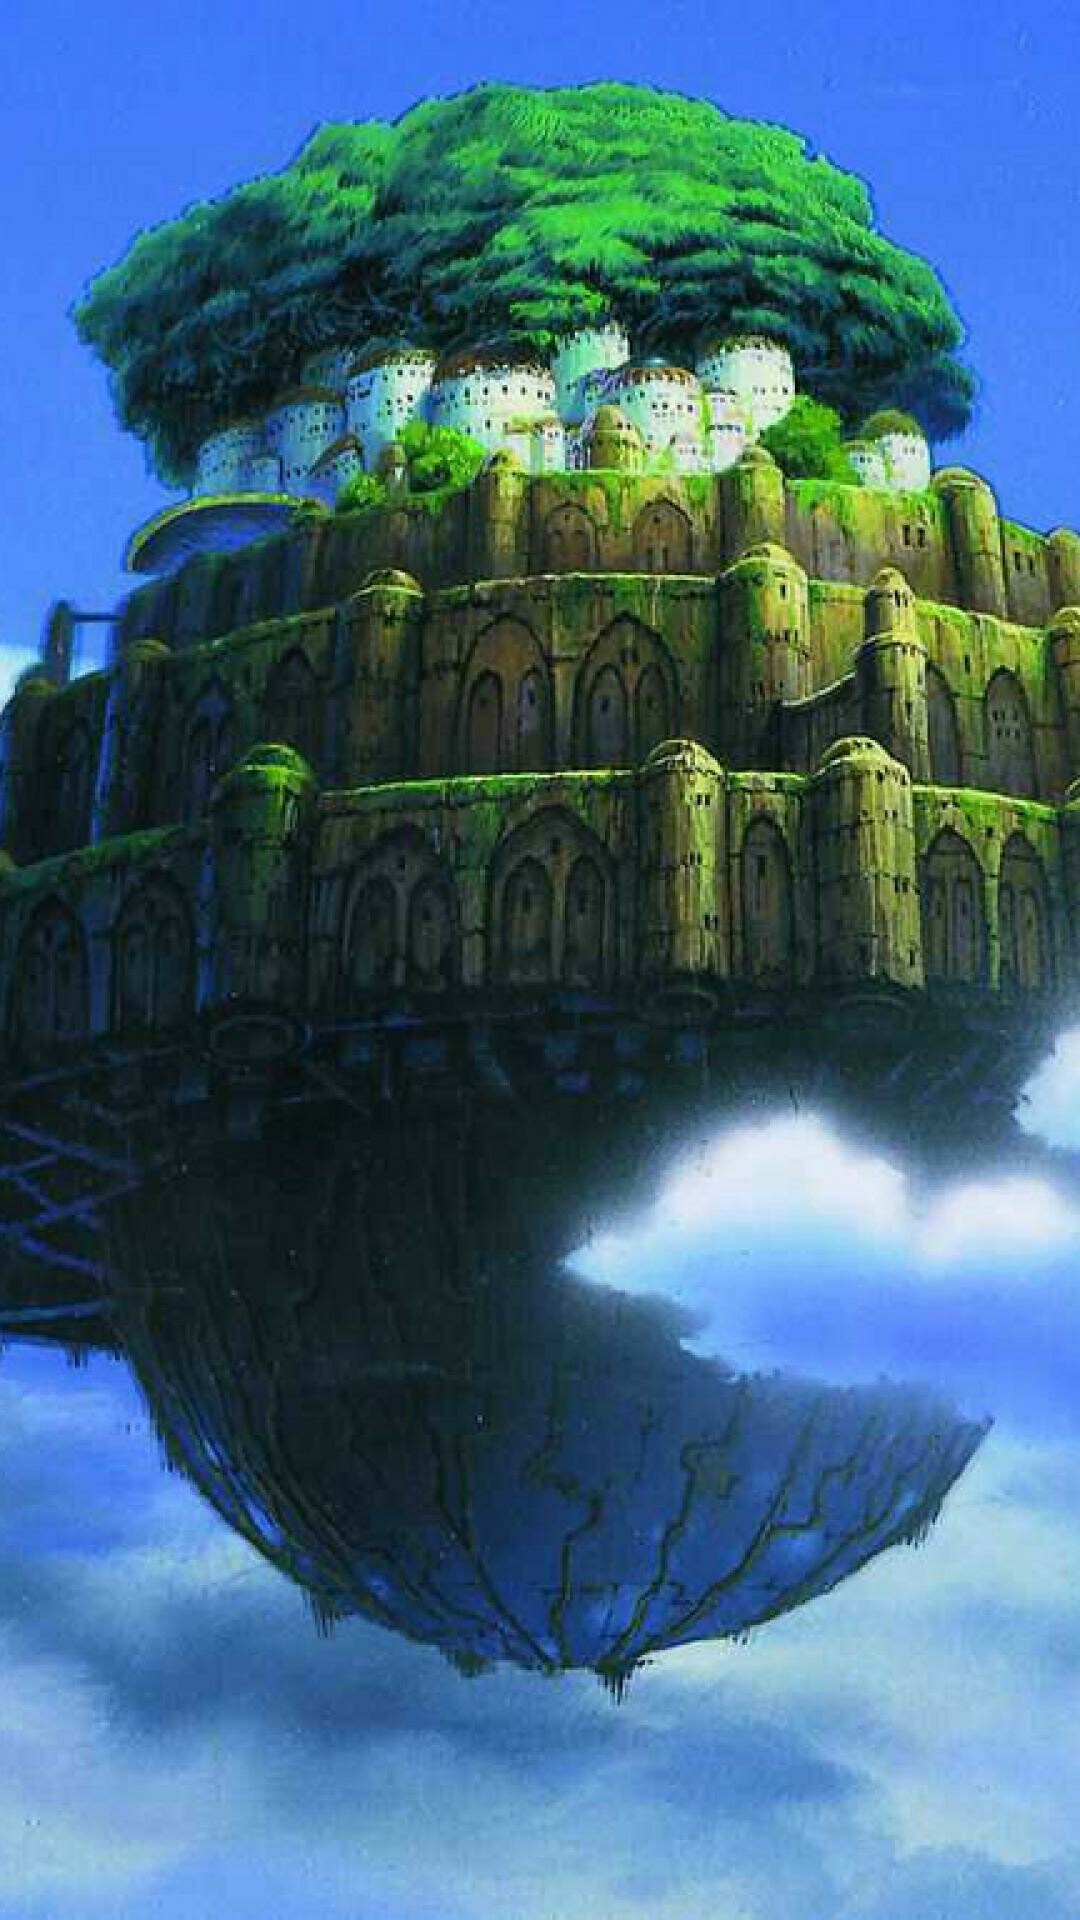 Laputa: Castle in the Sky: A legendary construction that resembles a castle, named for the floating land in Gulliver's Travels. 1080x1920 Full HD Background.